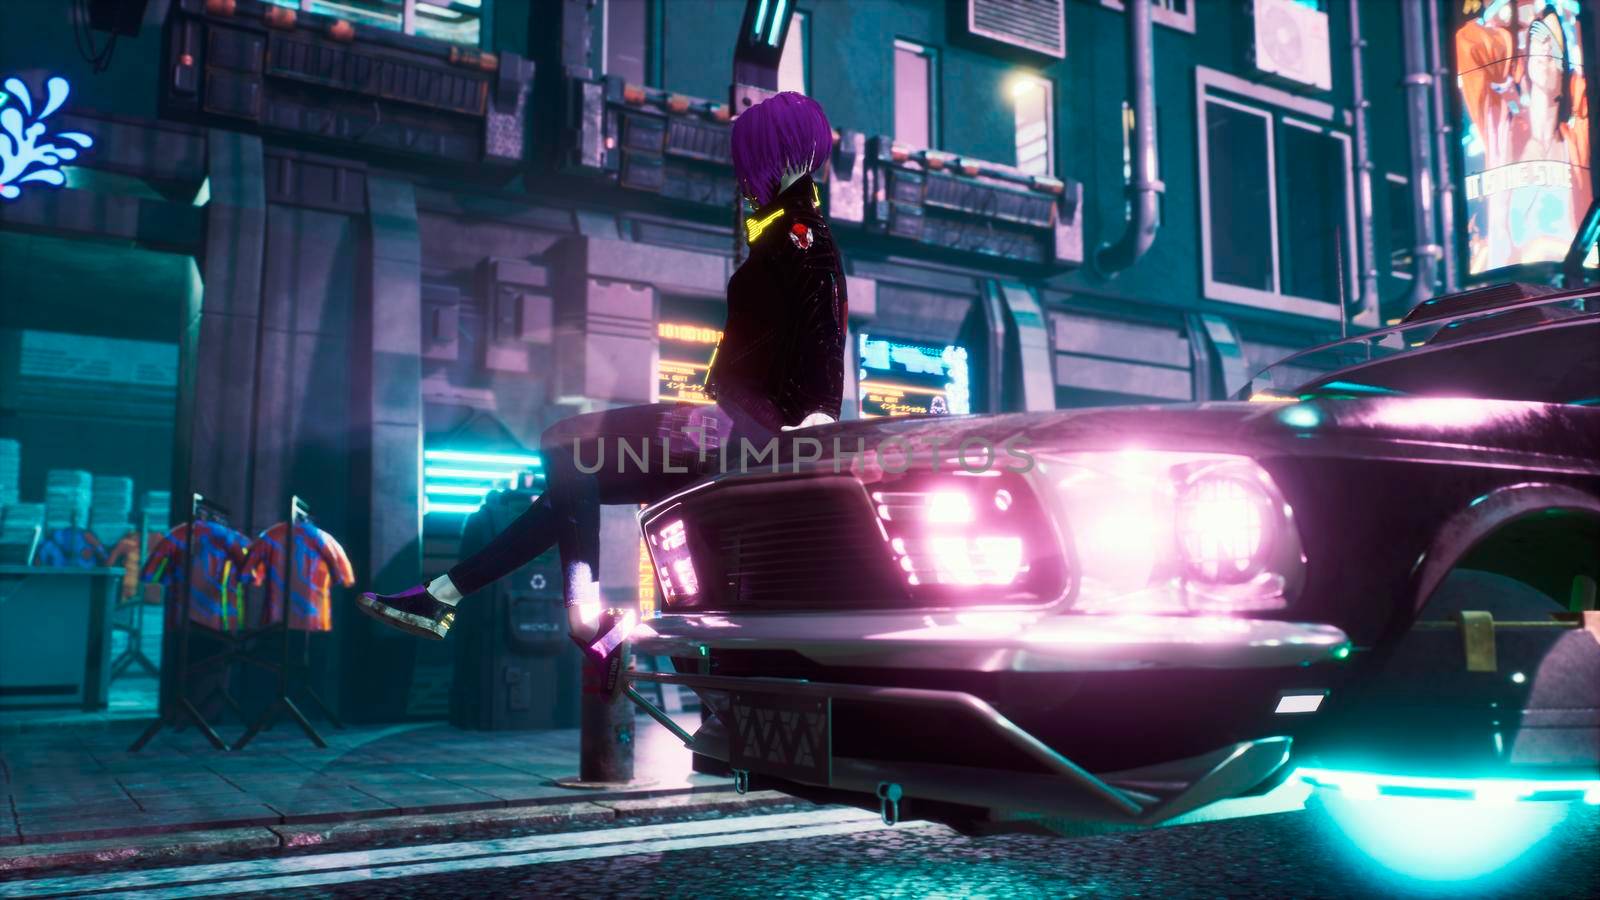 A girl is resting on the hood of her flying car in the middle of the night street of a neon cyber city. View of an future fiction city. Sci-fi cyber world concept.